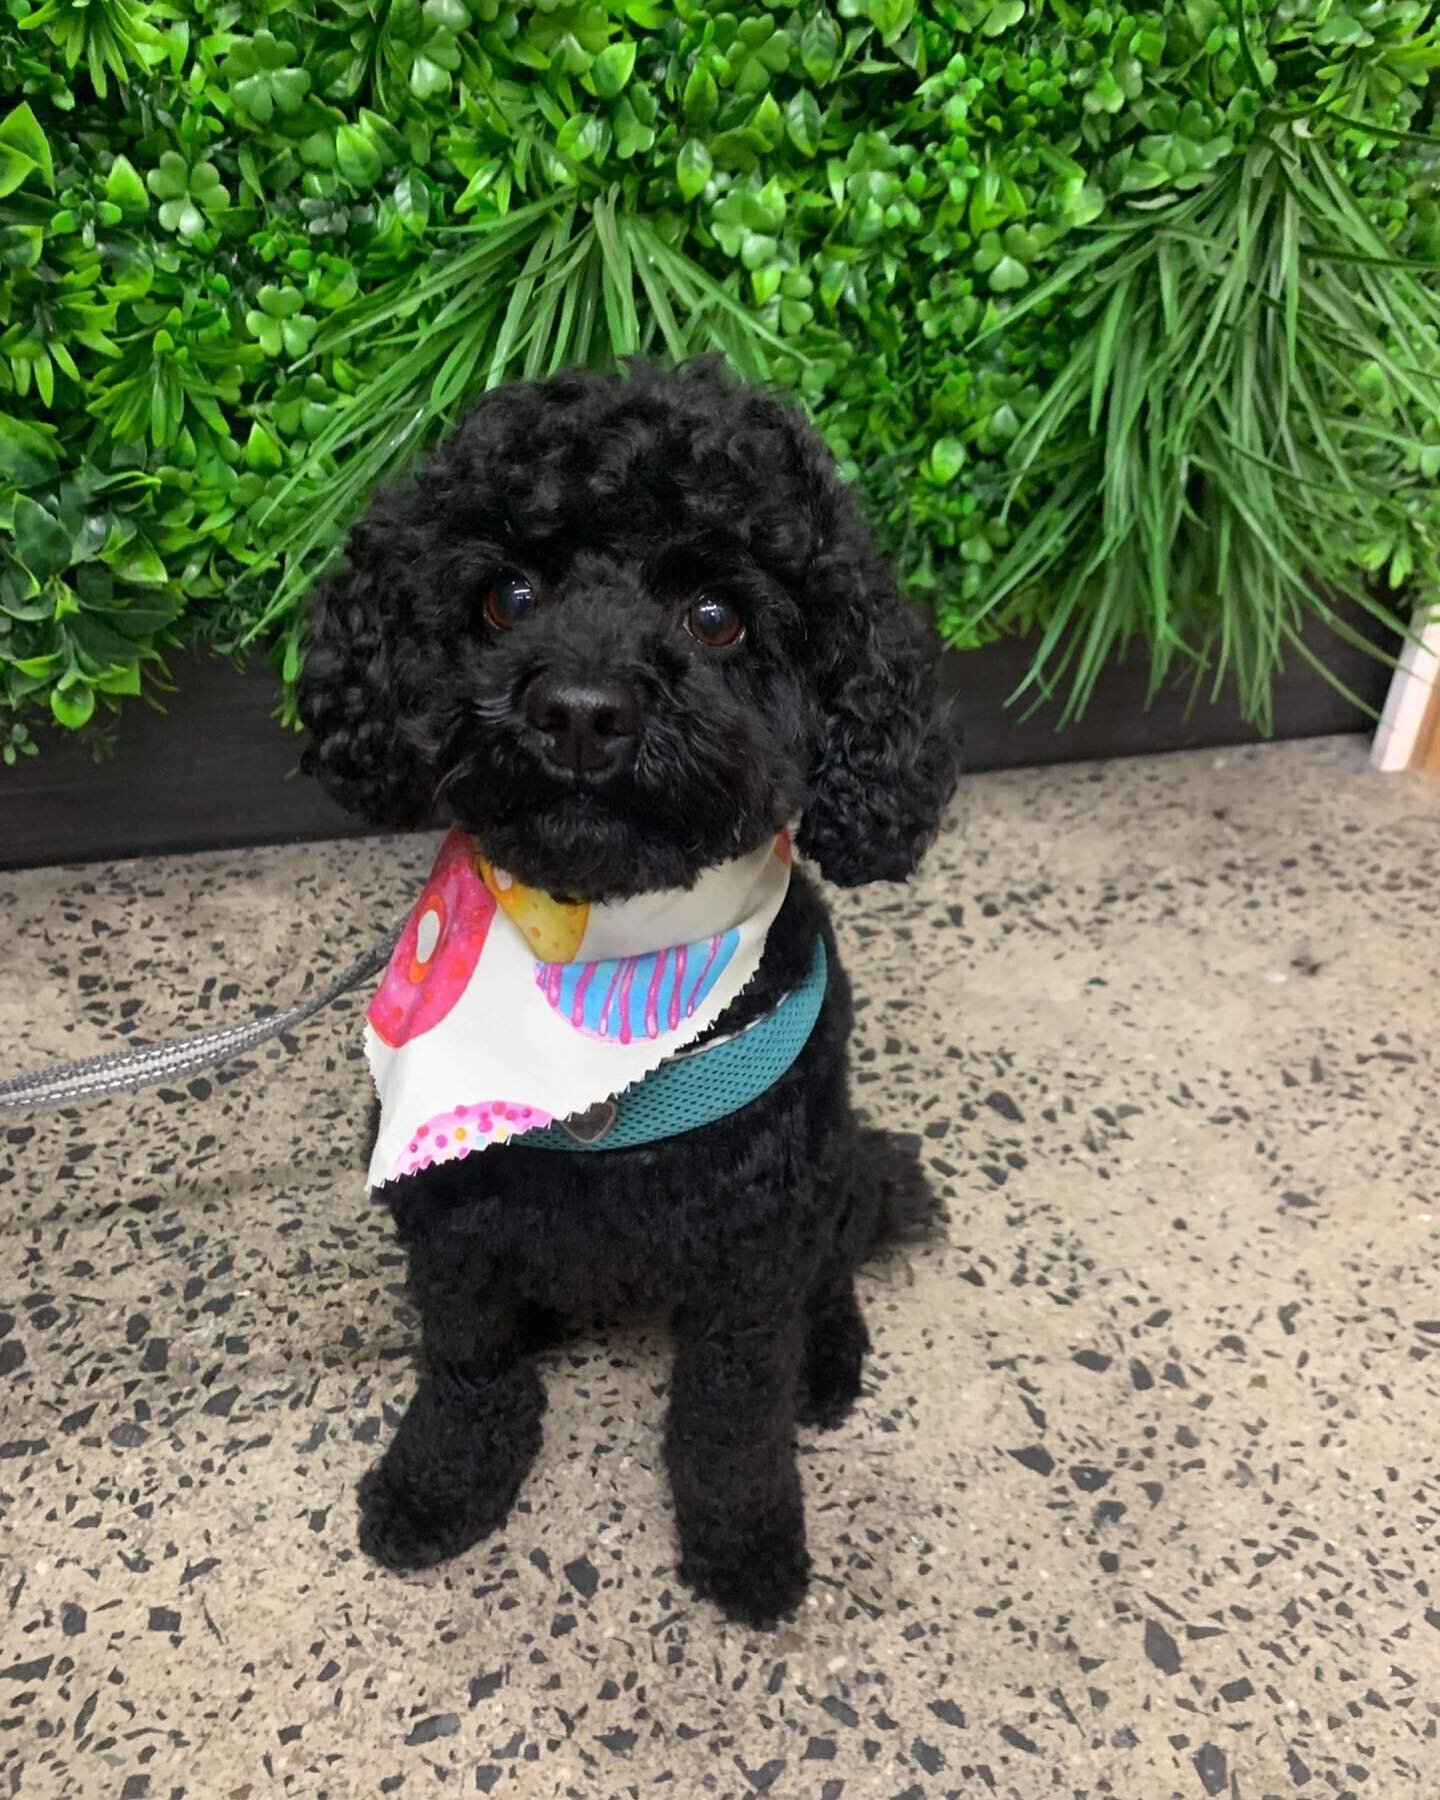 We are incredibly lucky to work with such wonderful dogs and help make them look fabulous 🐩✂️